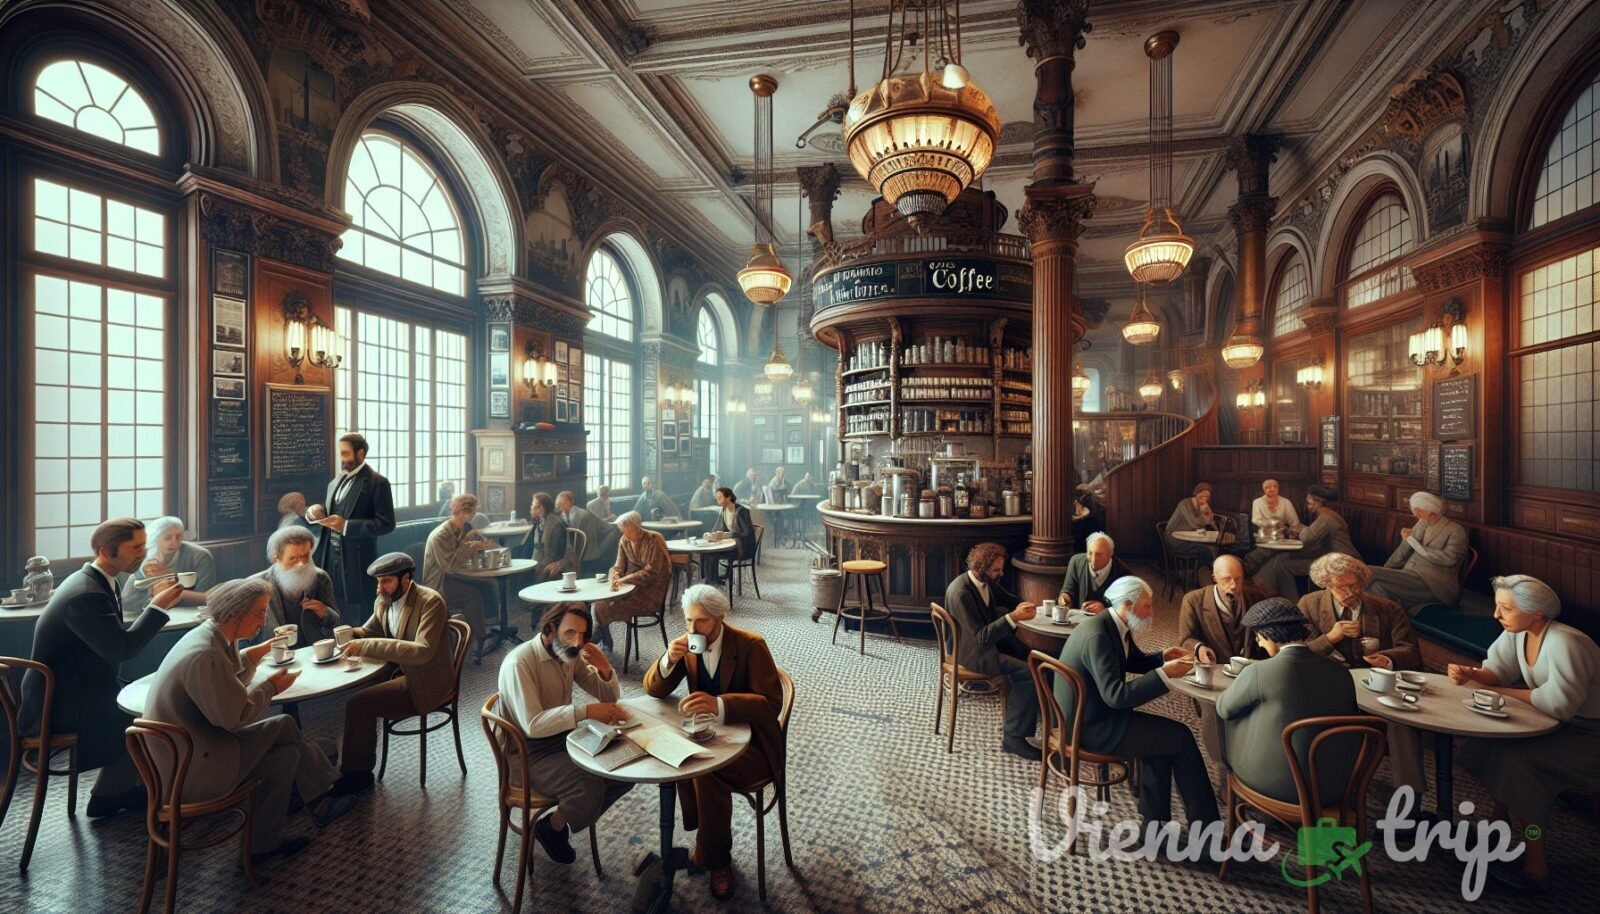 Illustration for section: Vienna's coffeehouses have played a crucial role in shaping the city's cultural identity. They have  - viennese coffee